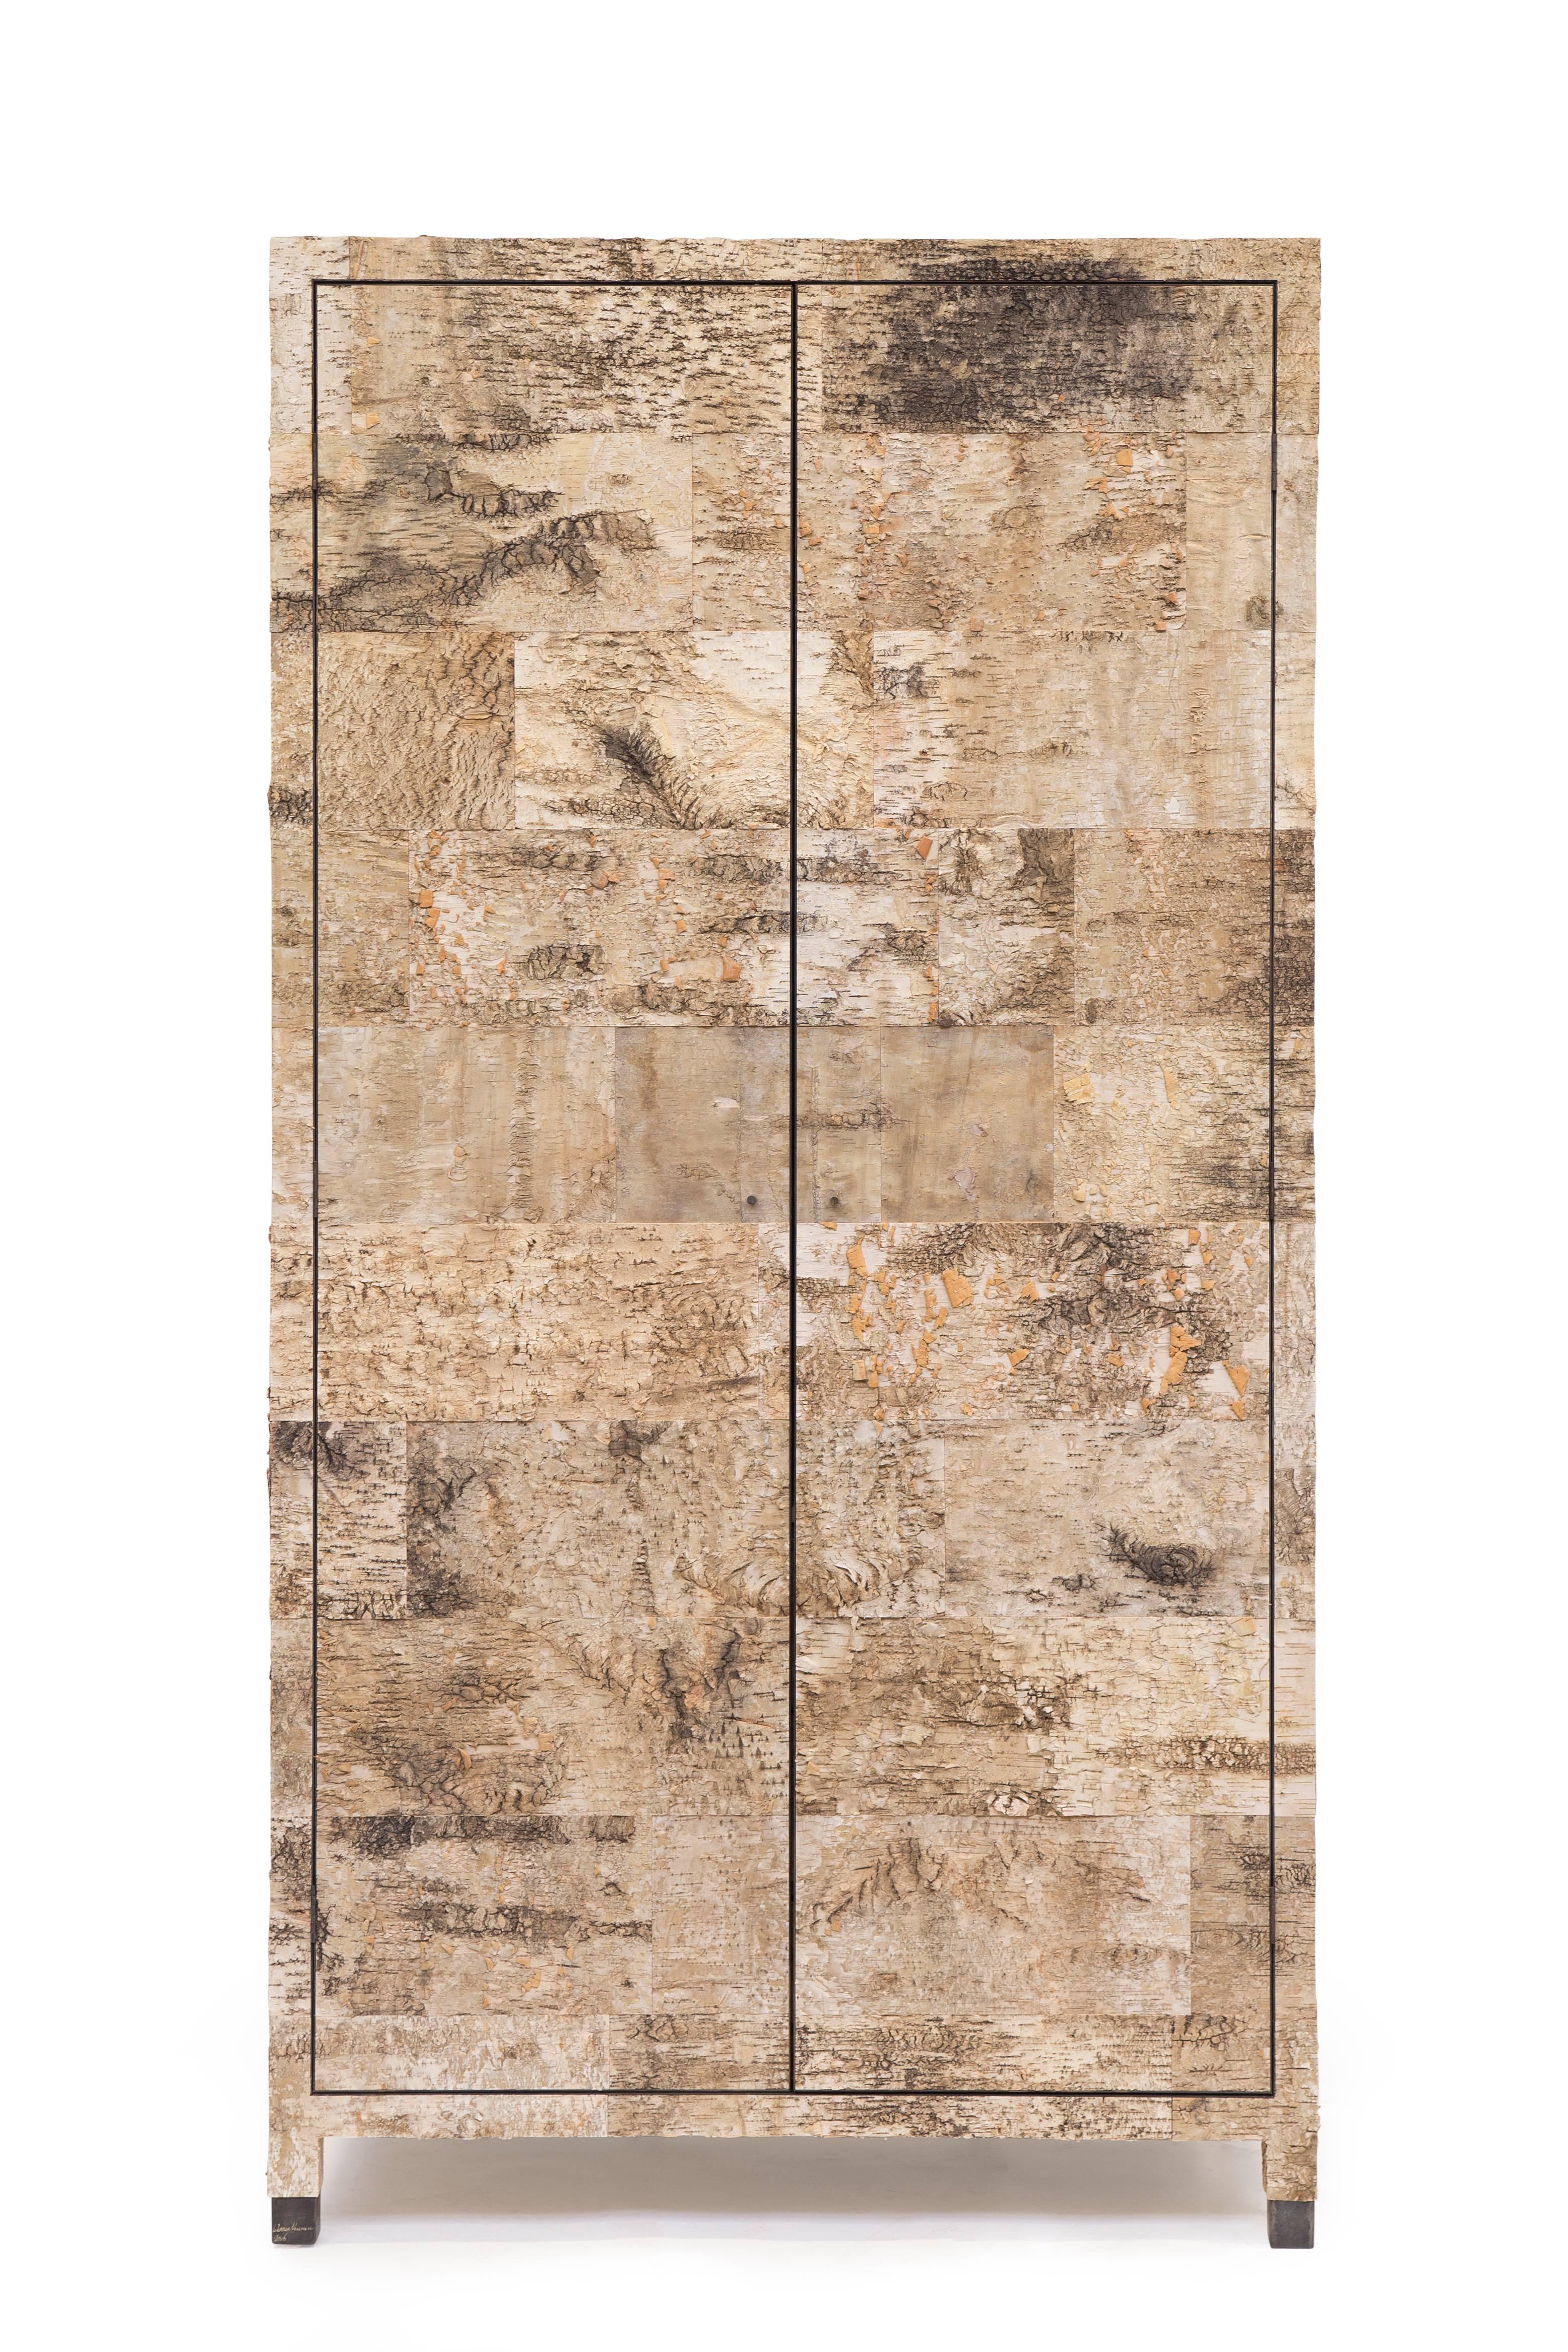 Birchwood armoir II
Material: Natural birchwood and brass
Size: 215 x 112 x 60 cm
Signed Werner Neumann

The birchwood collection: Werner Neumann found loose pieces of birchwood while hiking in the woods, brought them to his
studio and started